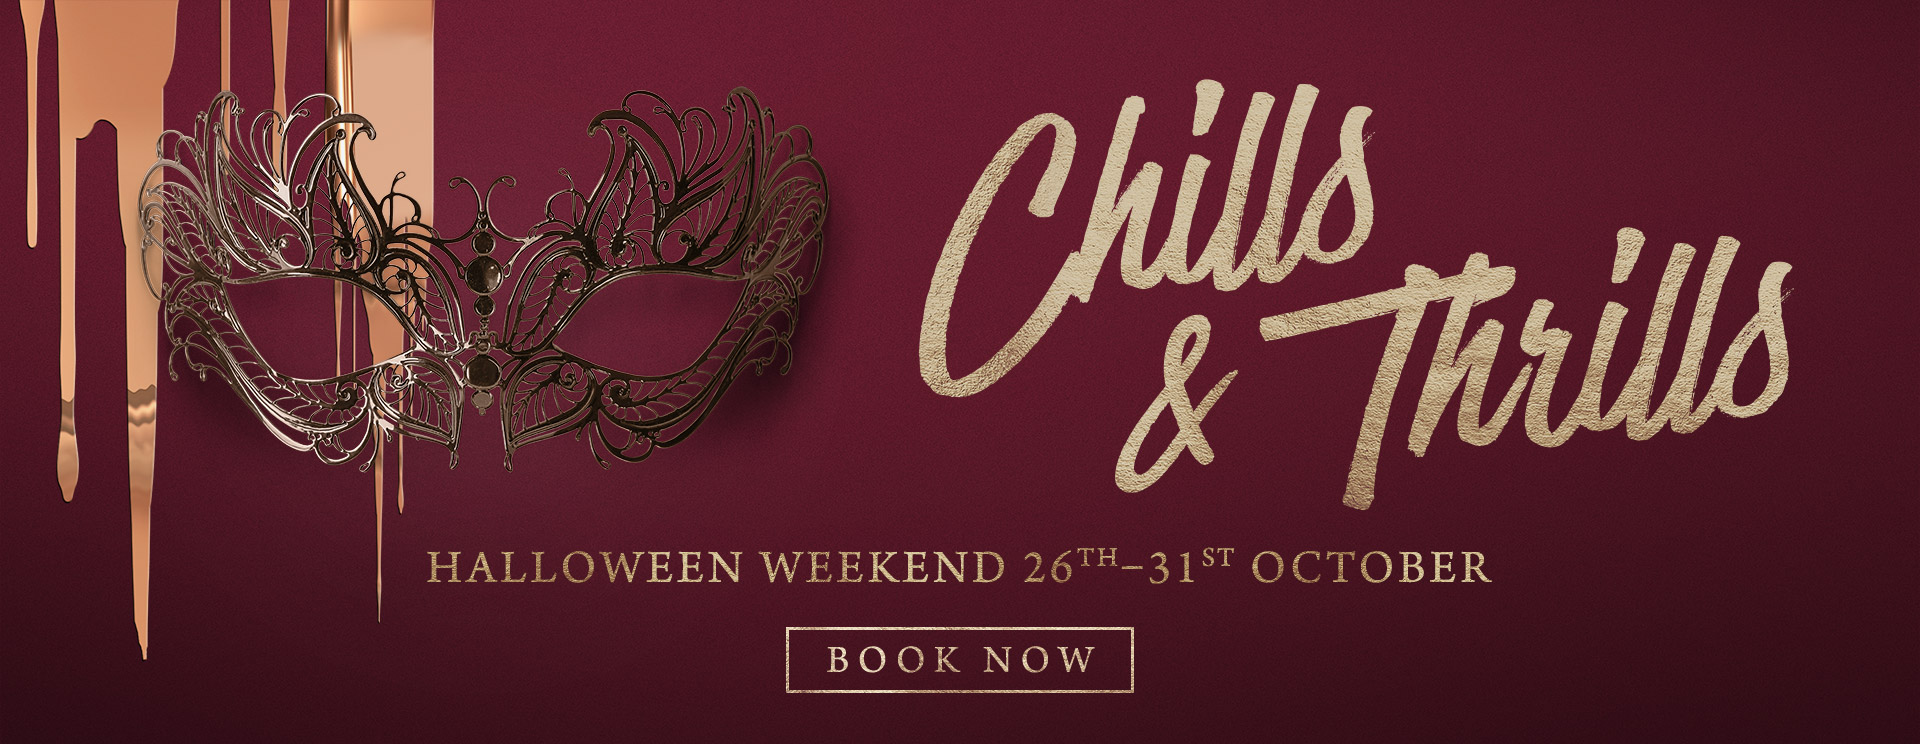 Chills & Thrills this Halloween at The Inn On The Lake